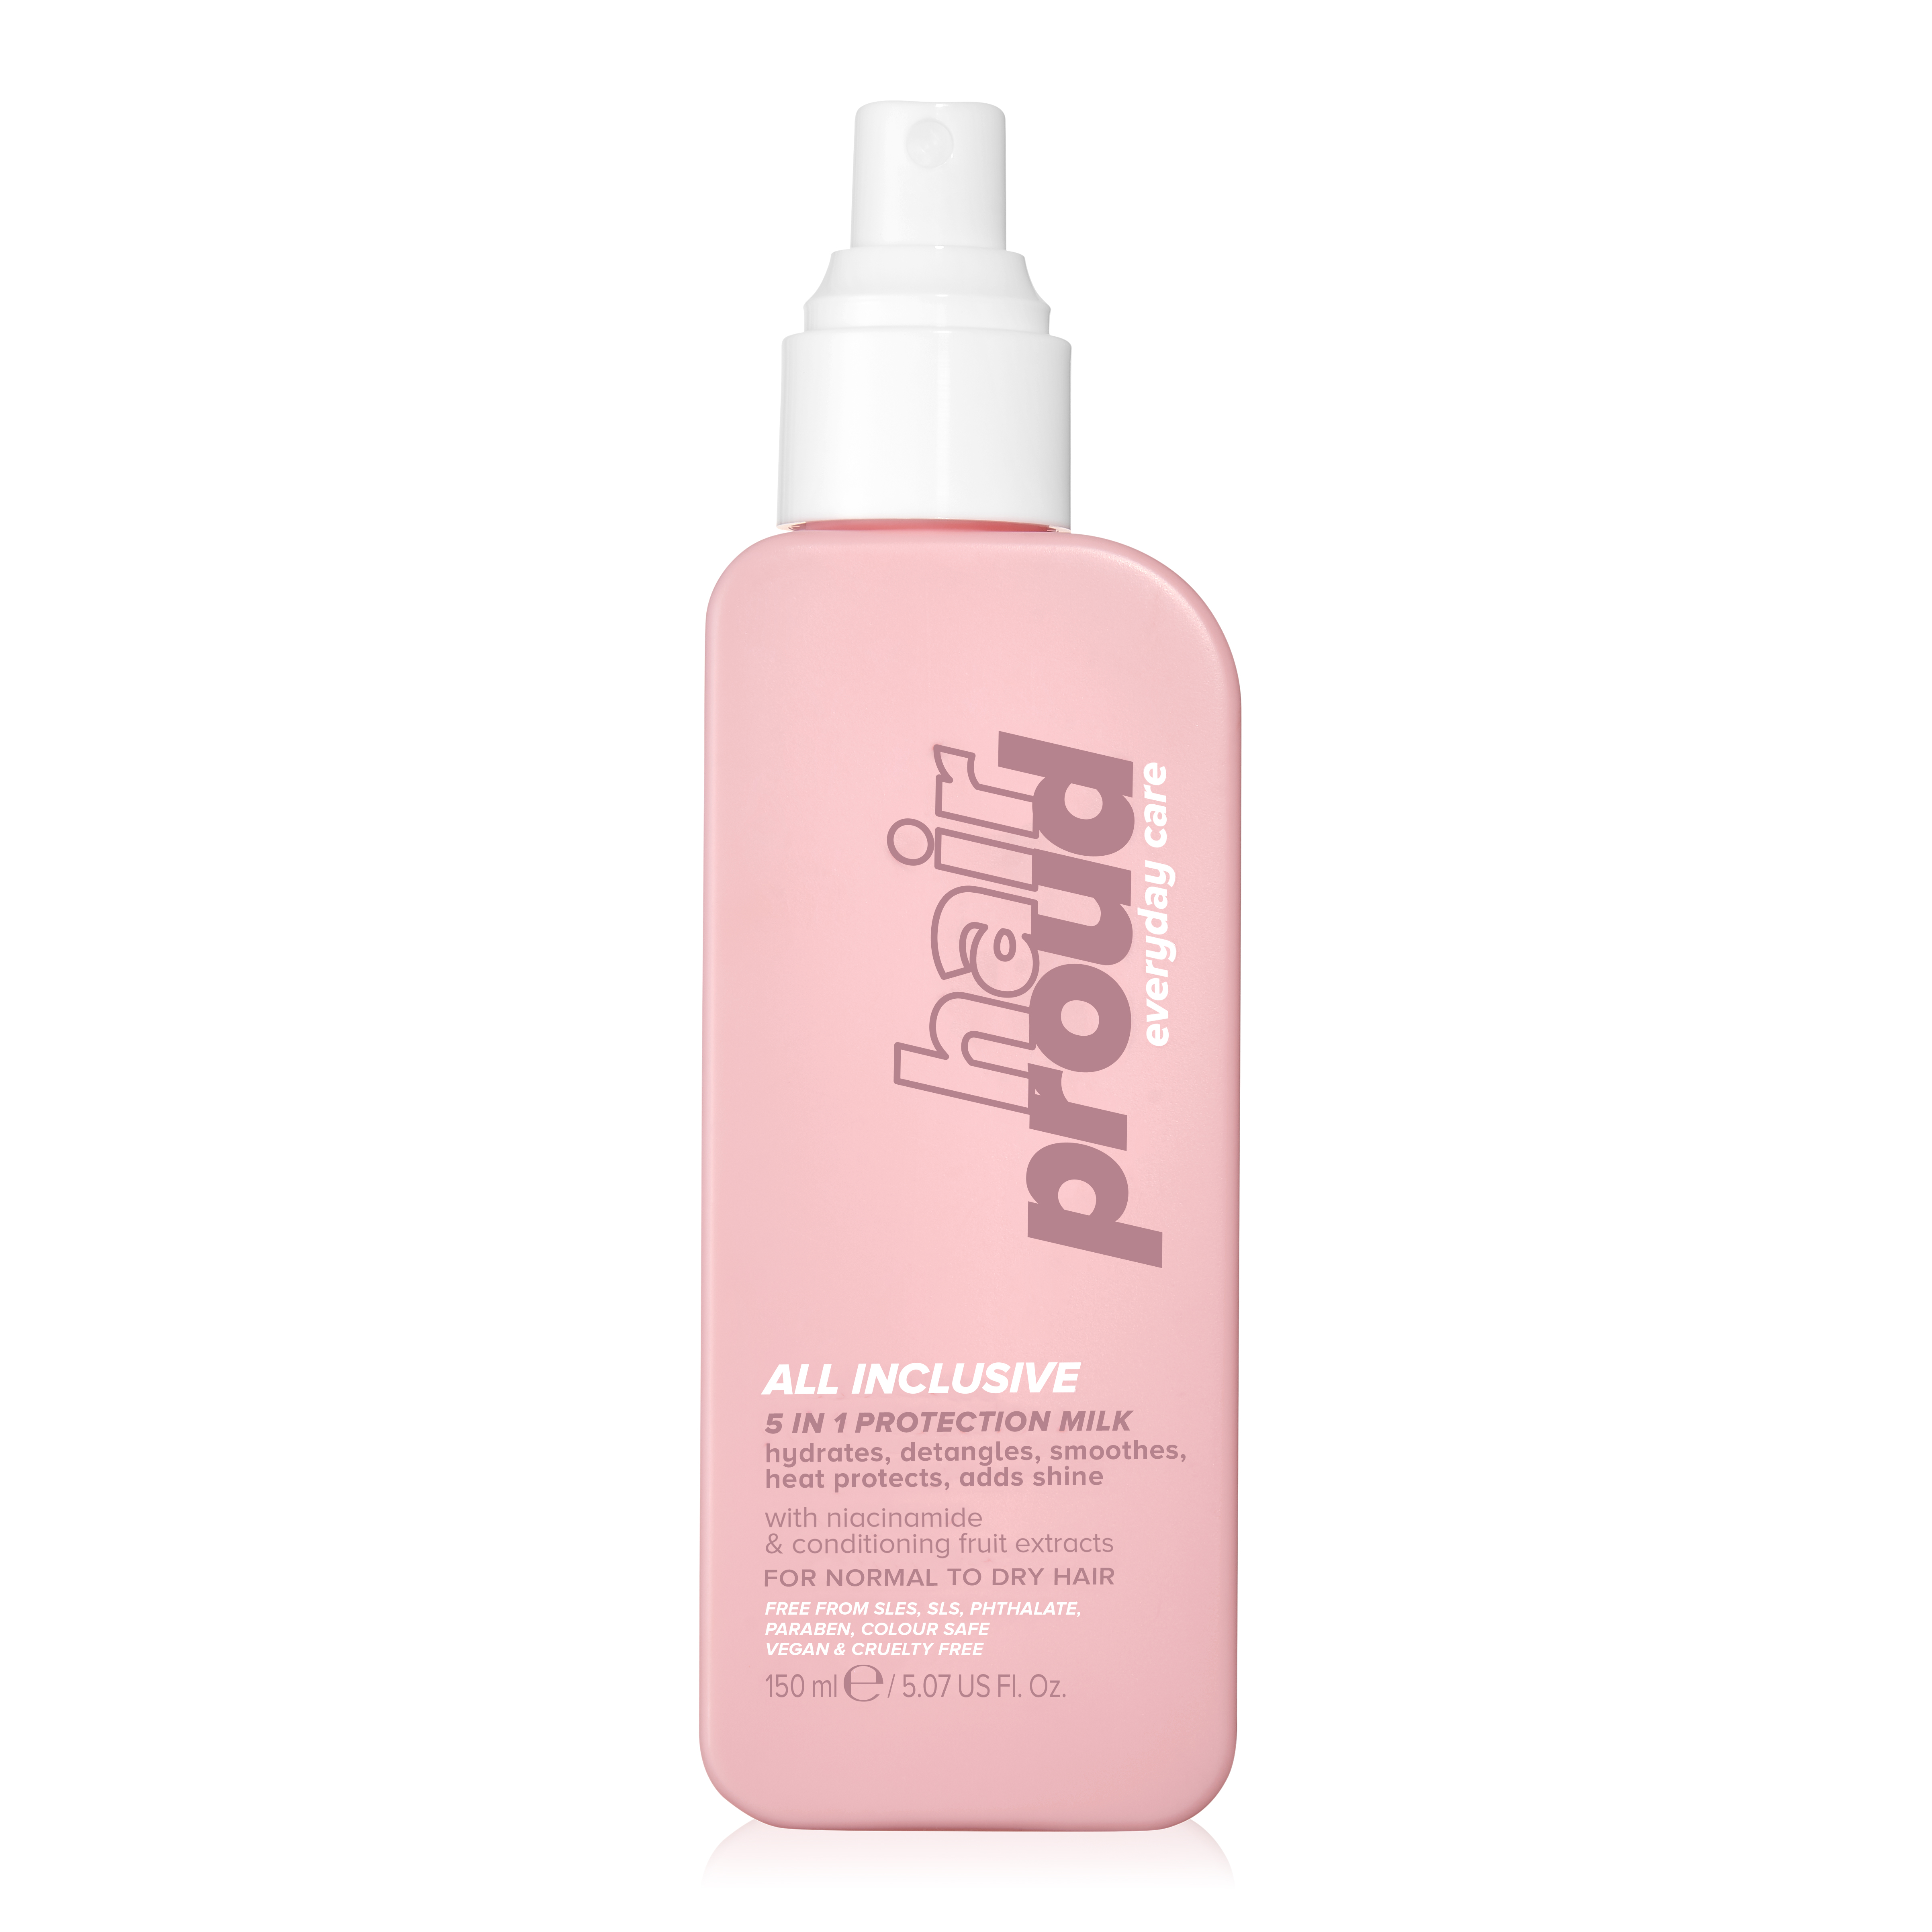 Hair Proud, 5-in-1 Protection, All Inclusive Leave-in Spray with Niacinamide, 5.07 fl oz